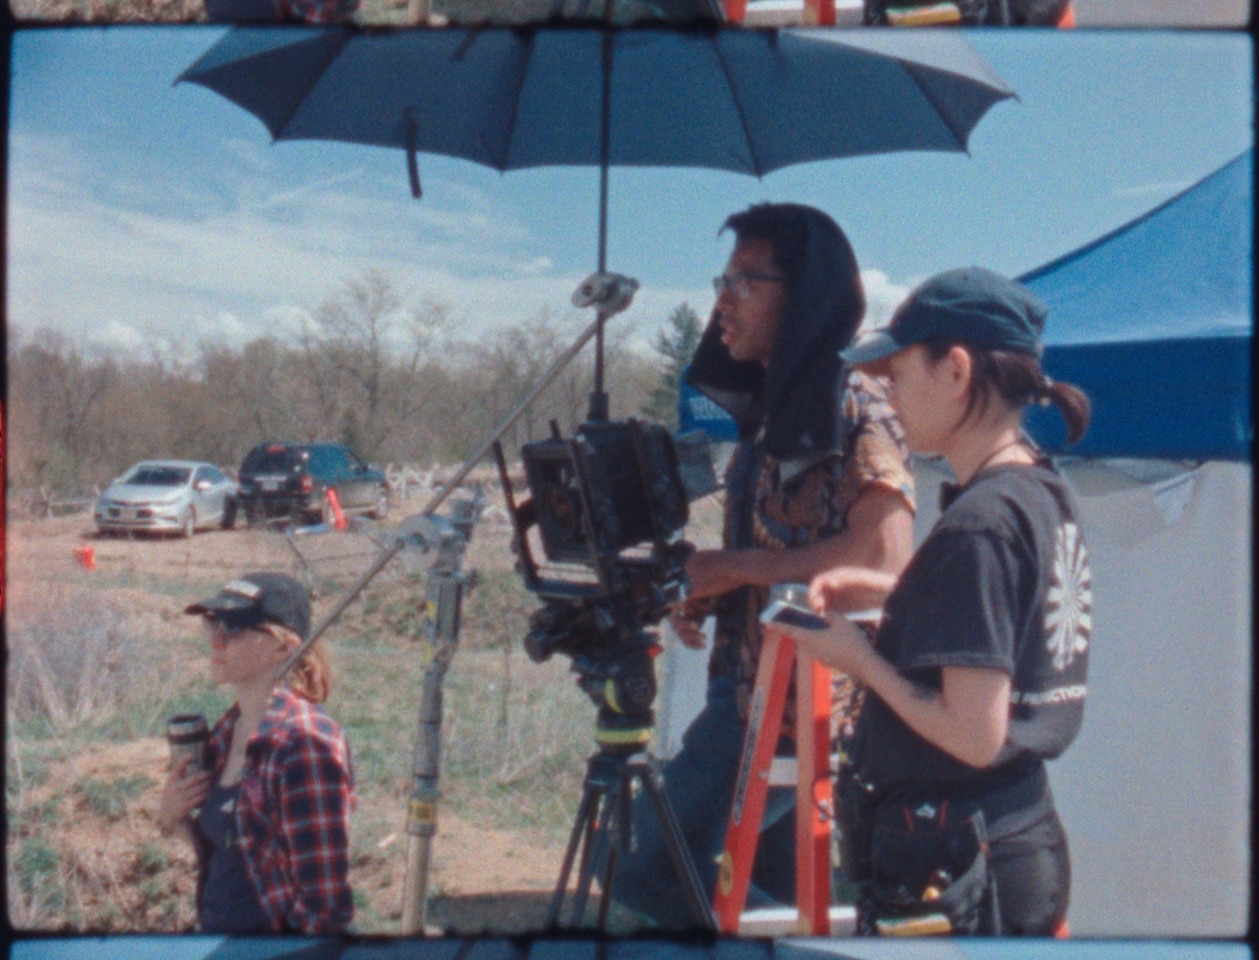 Super 8 BTS footage. That’s me behind the camera, wearing the dark cloth on set of one of my shoots along with Kat Cameron, 1st AD, on the left and Sunnie Kim, 1st AC, on the right.